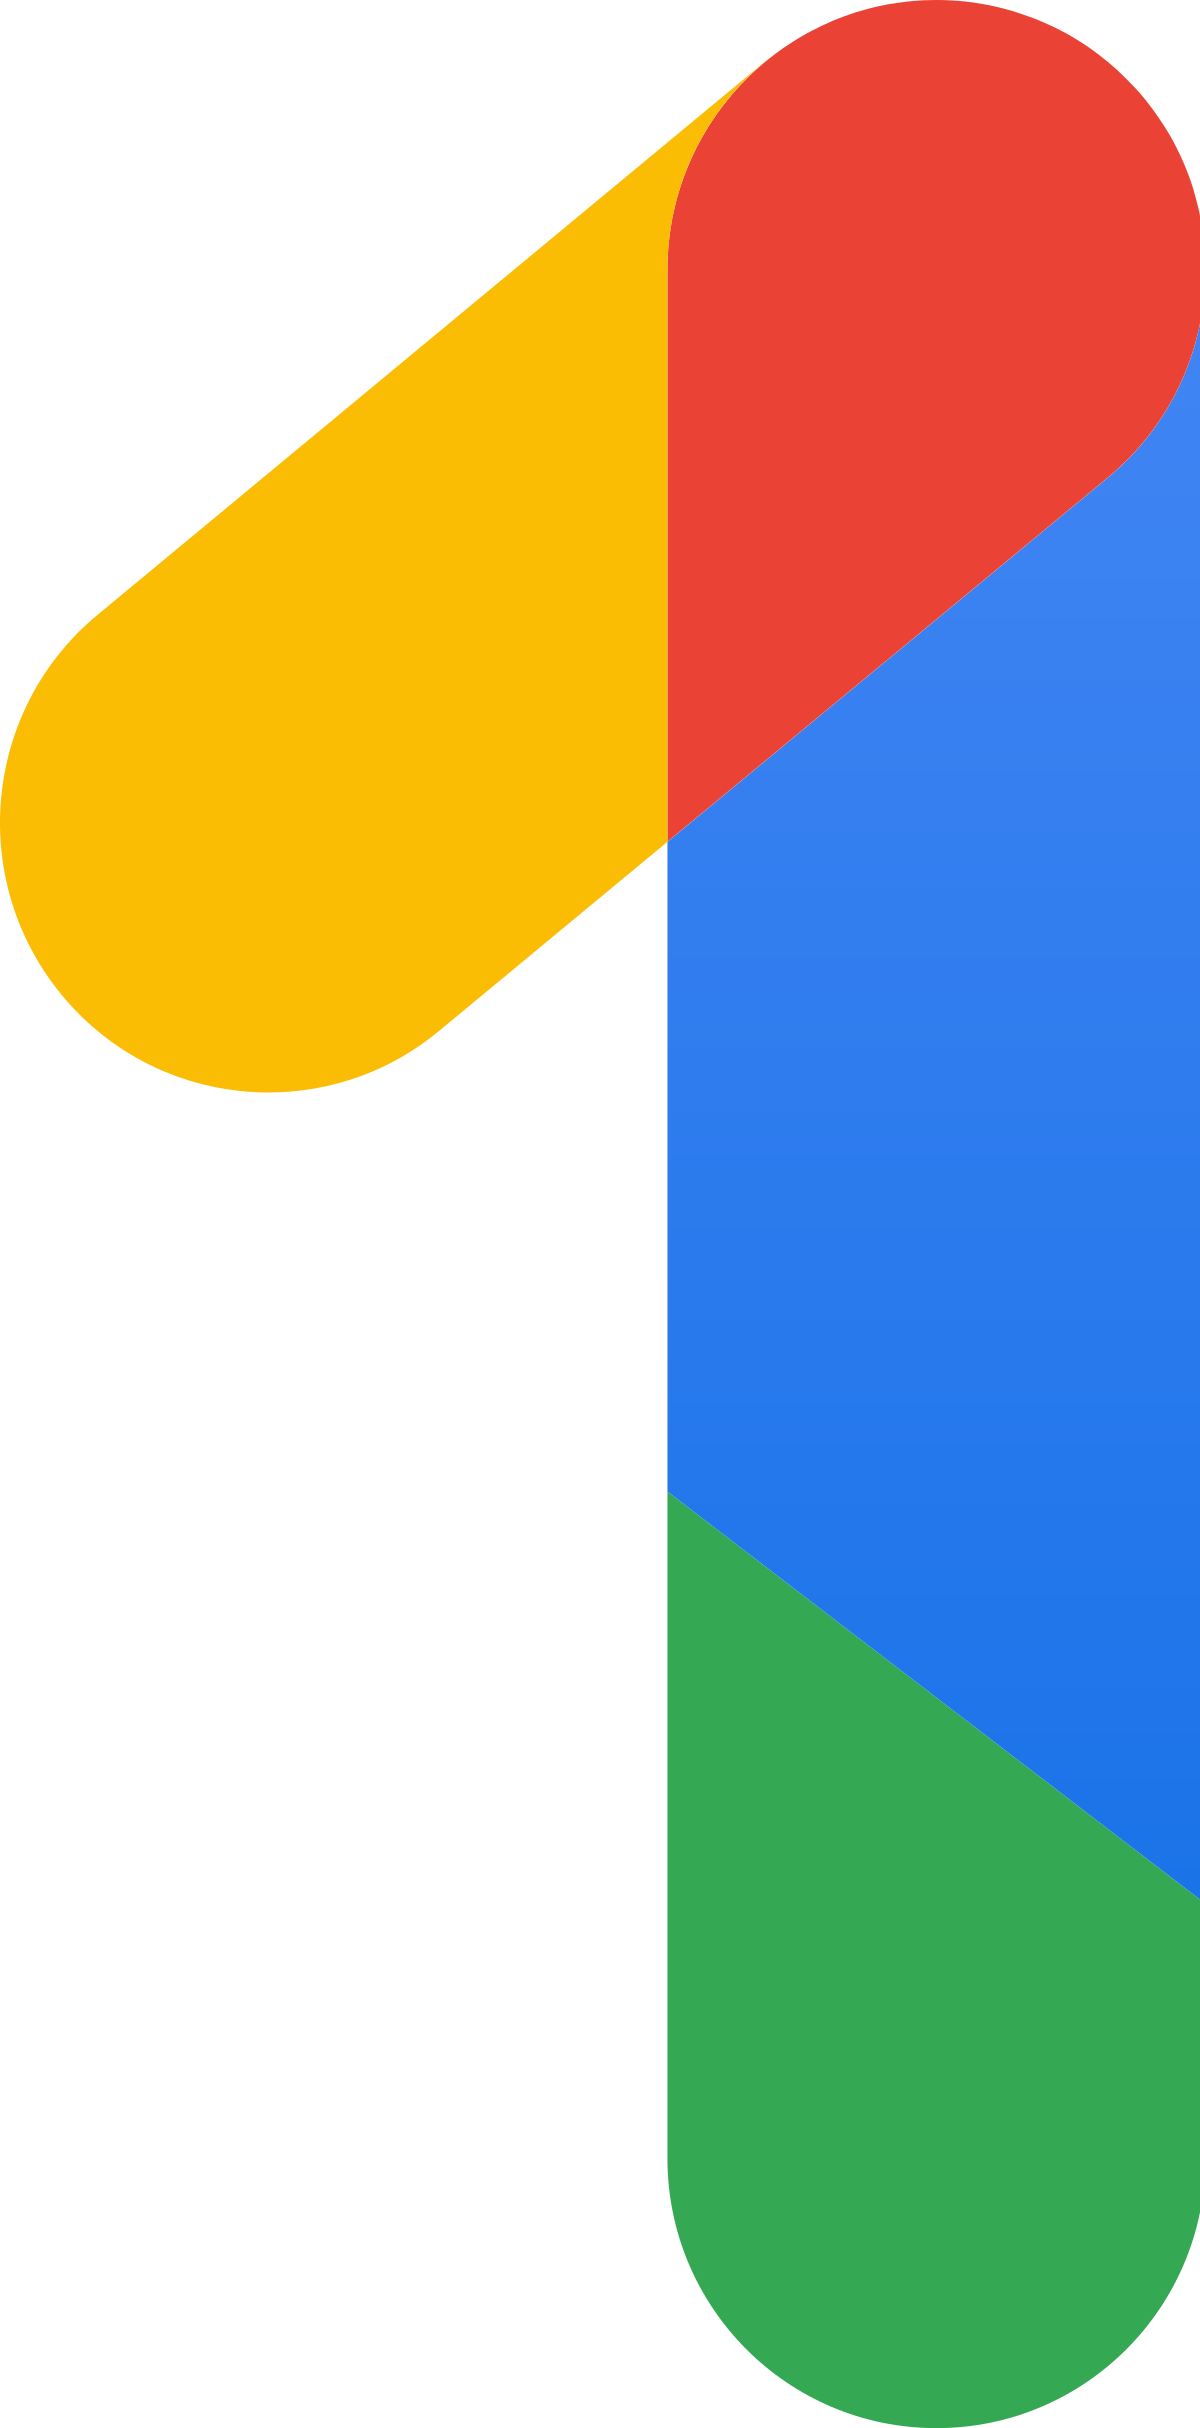 Download File:Google One logo.svg - Wikimedia Commons